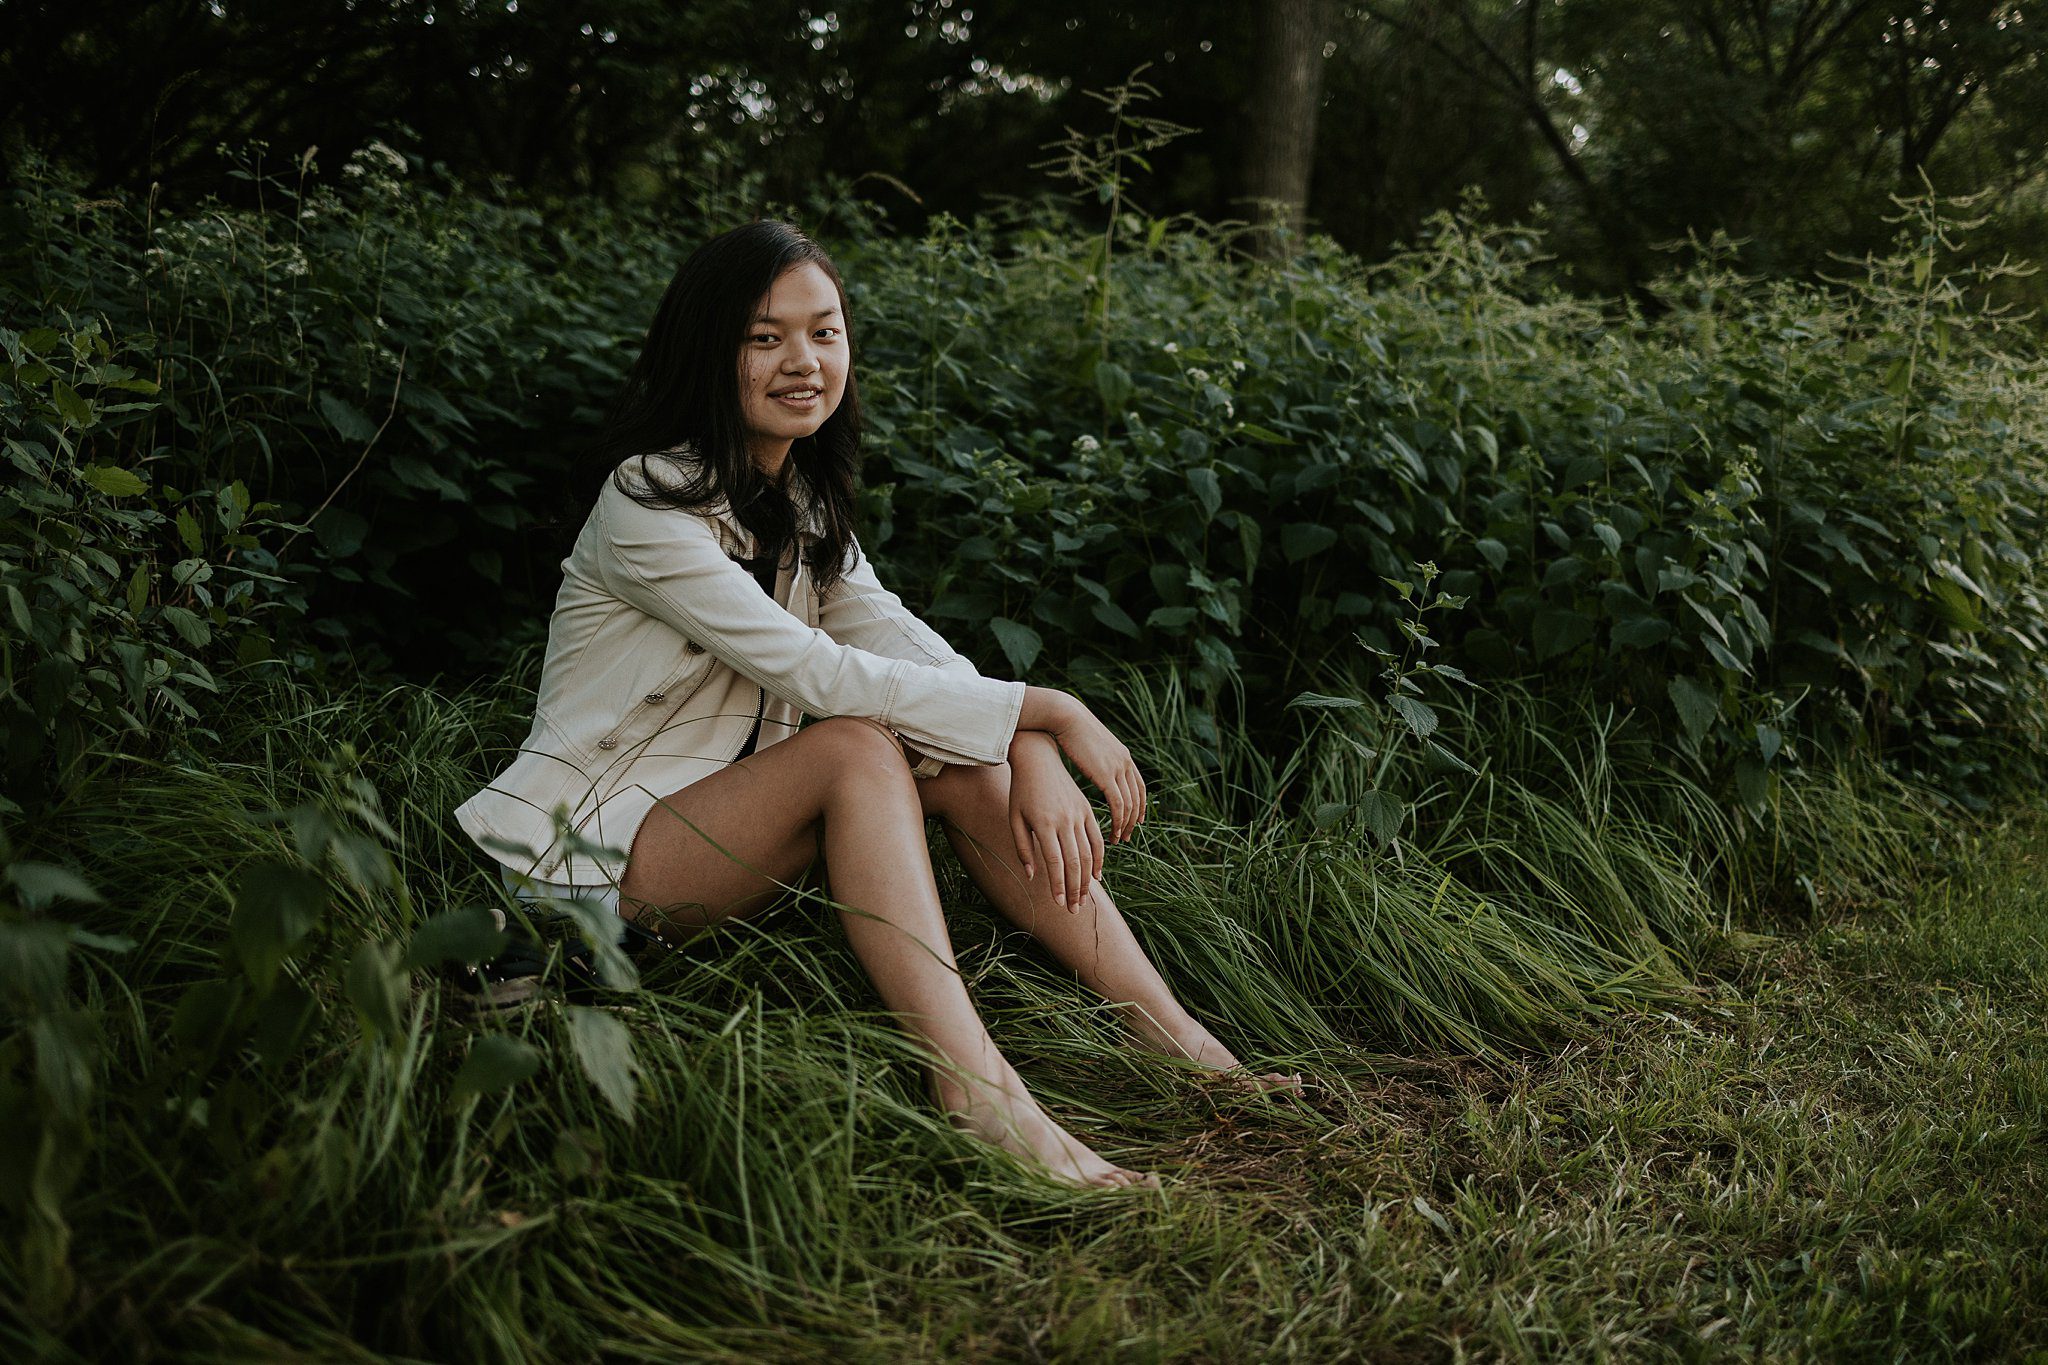 A girl is getting her senior photos taken in Northwest Iowa. She has black hair and is wearing a white jacket and shorts. She's sitting comfortably in the grass in front of some native grasses smiling at the camera. 